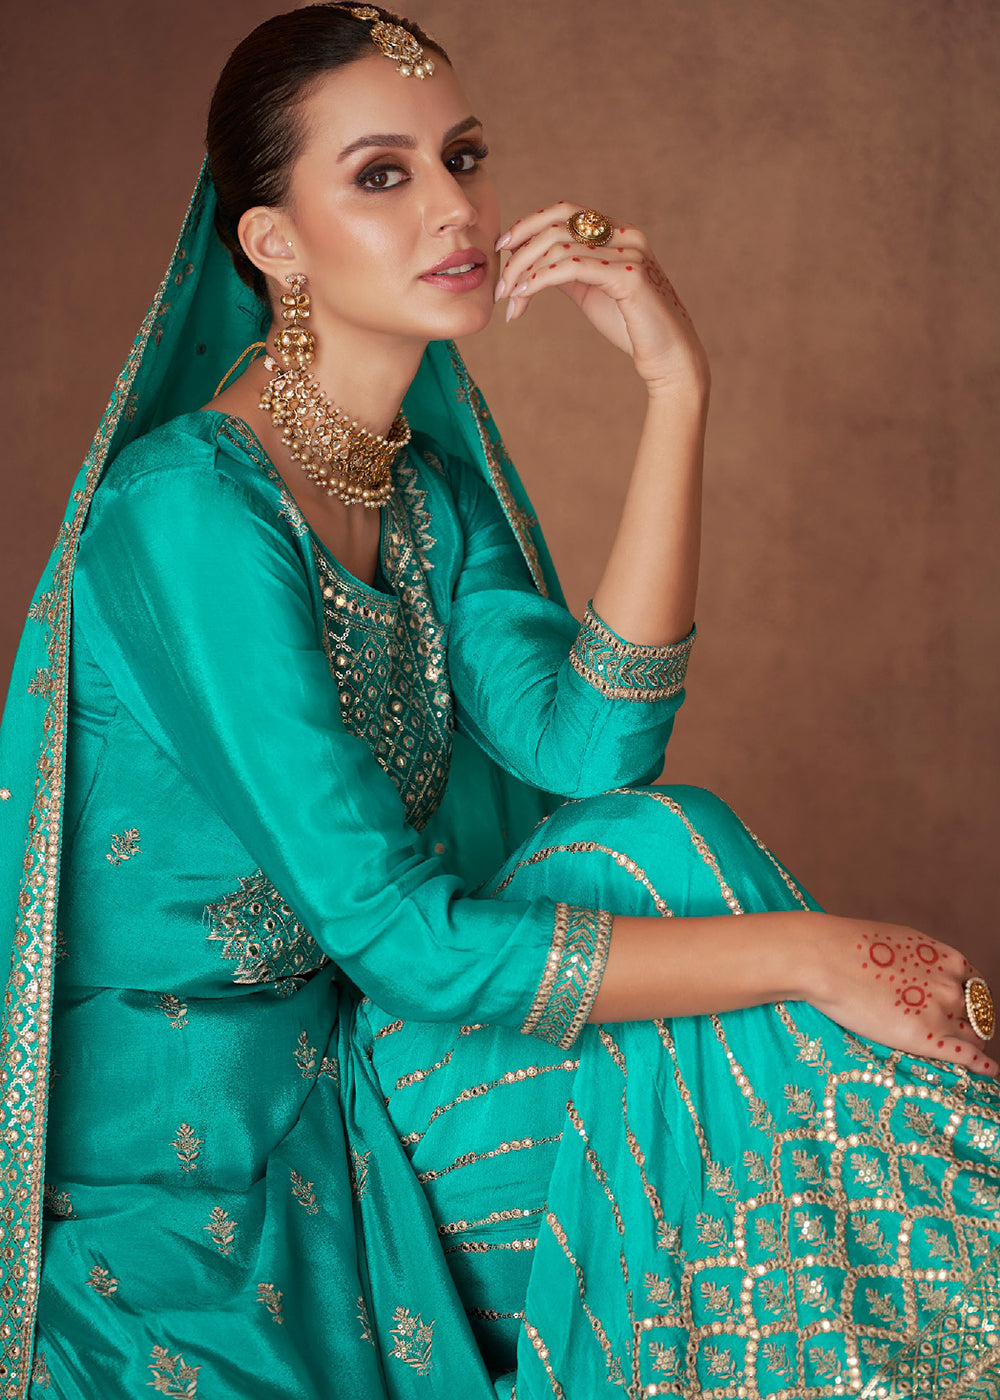 Buy Now Embellished Aqua Green Chinon & Georgette Designer Palazzo Suit Online in USA, UK, Canada, Germany, Australia & Worldwide at Empress Clothing.